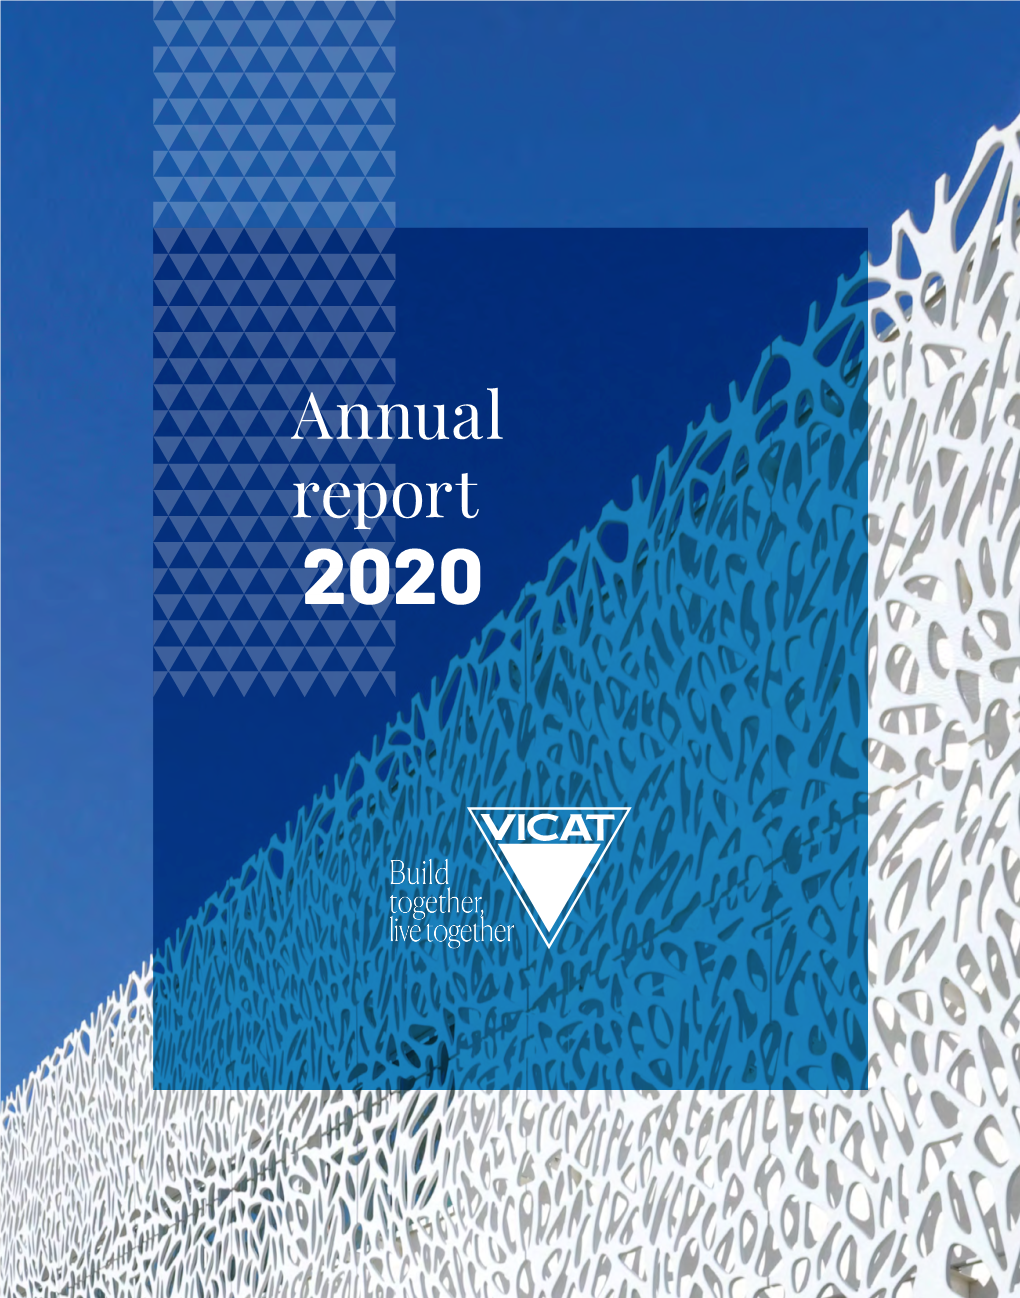 Annual Report 2020 Cover Photo: Bioclimatic Architecture Using Decorative SMARTUP Concrete Tracery at Gigamed Business Incubator (Southern France)